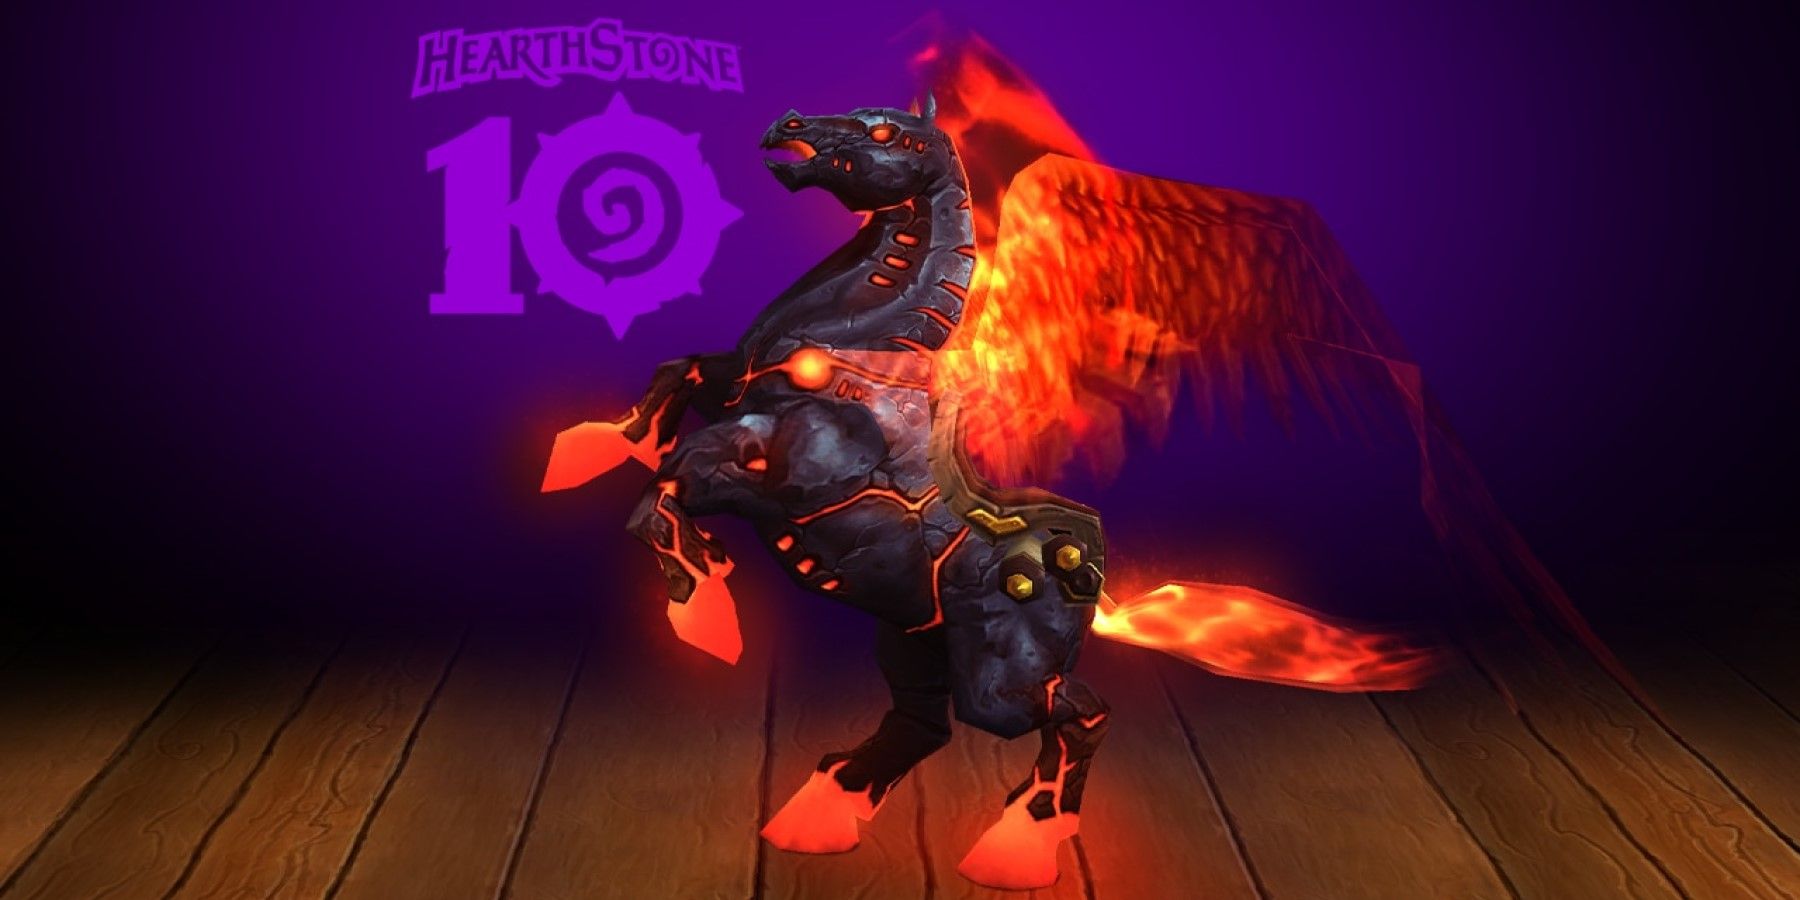 wow hs crossover fiery hearthsteed